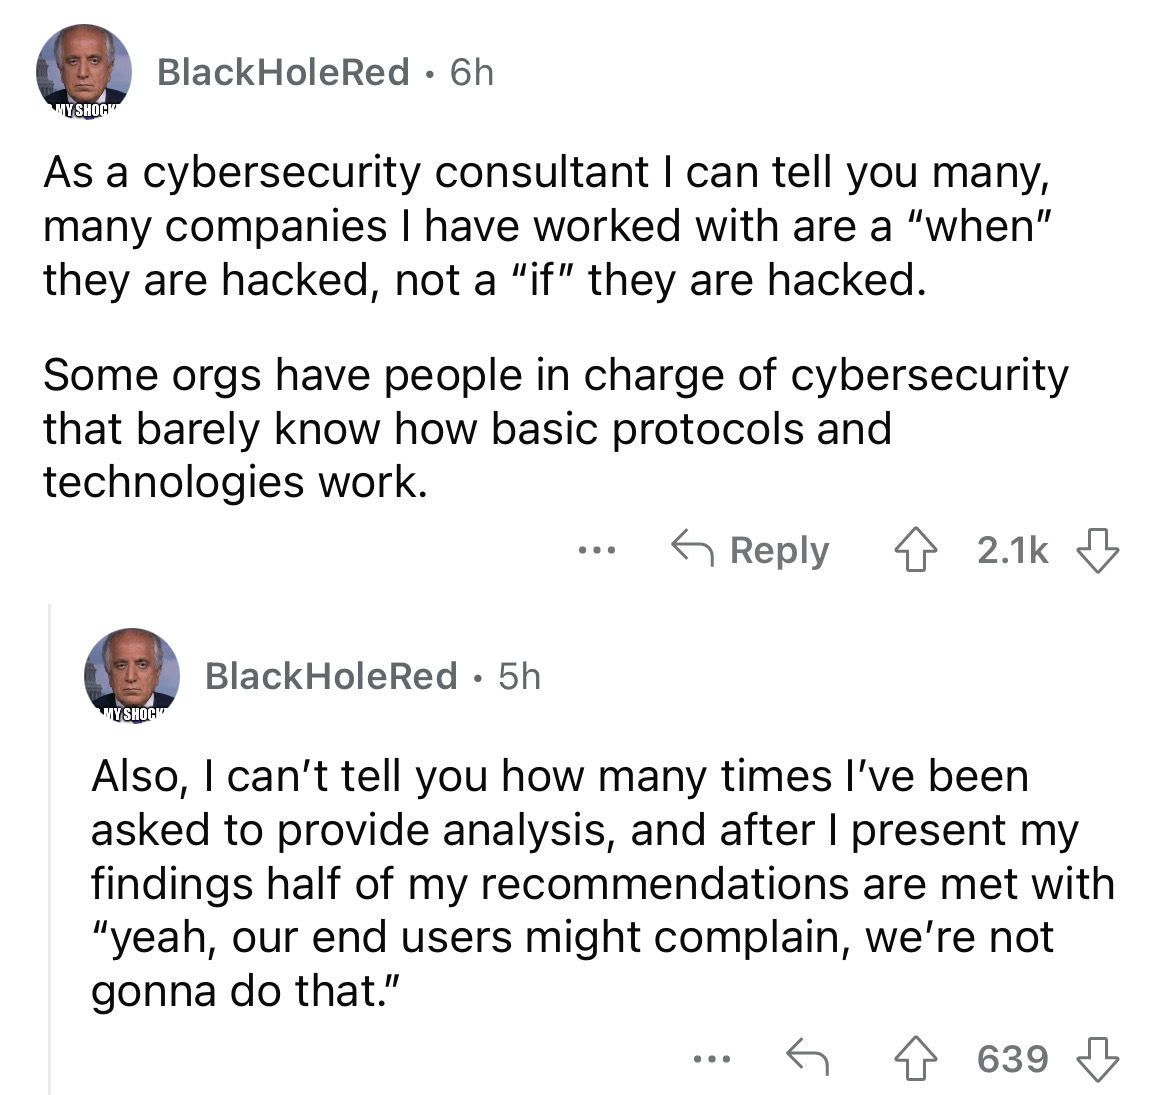 screenshot - My Shock BlackHole Red 6h As a cybersecurity consultant I can tell you many, many companies I have worked with are a "when" they are hacked, not a "if" they are hacked. Some orgs have people in charge of cybersecurity that barely know how bas